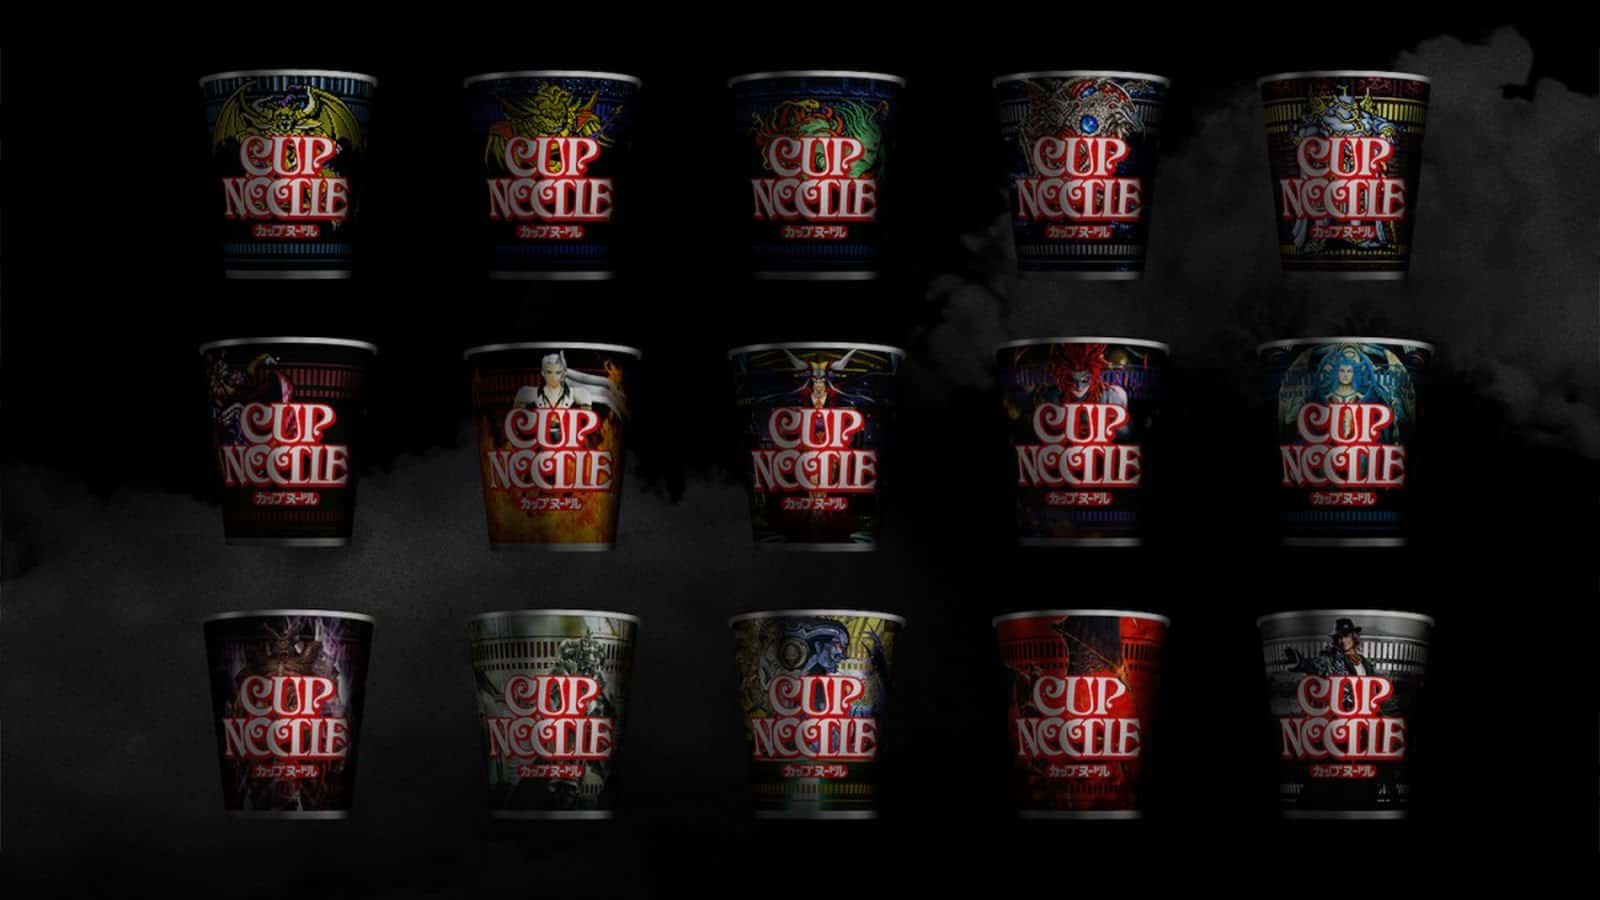 Vamers - FYI - Geekosphere - Behold Ultima Weapon Forks for the serious Cup Noodle enthusiast - 01